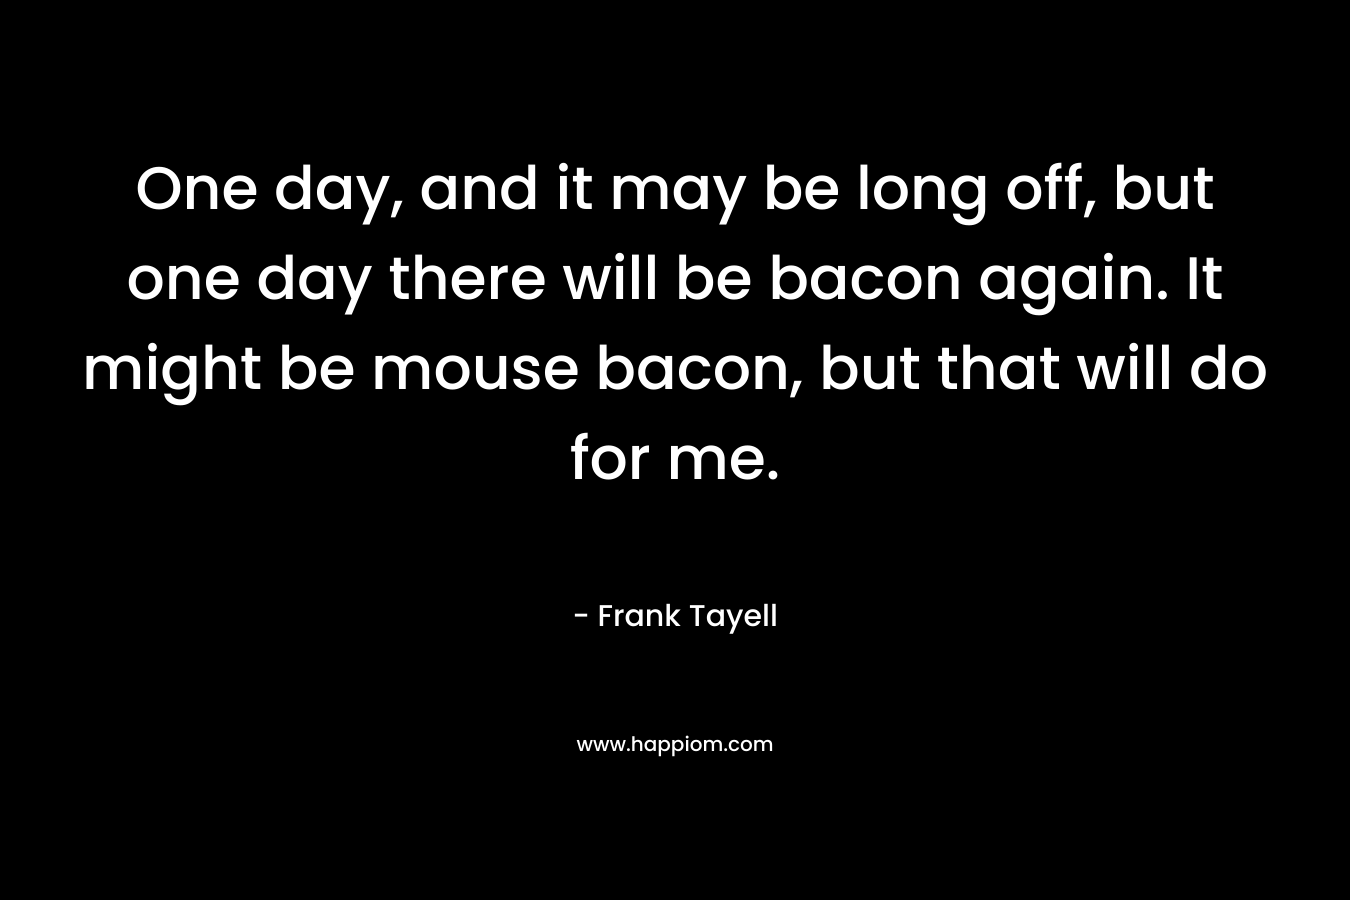 One day, and it may be long off, but one day there will be bacon again. It might be mouse bacon, but that will do for me.